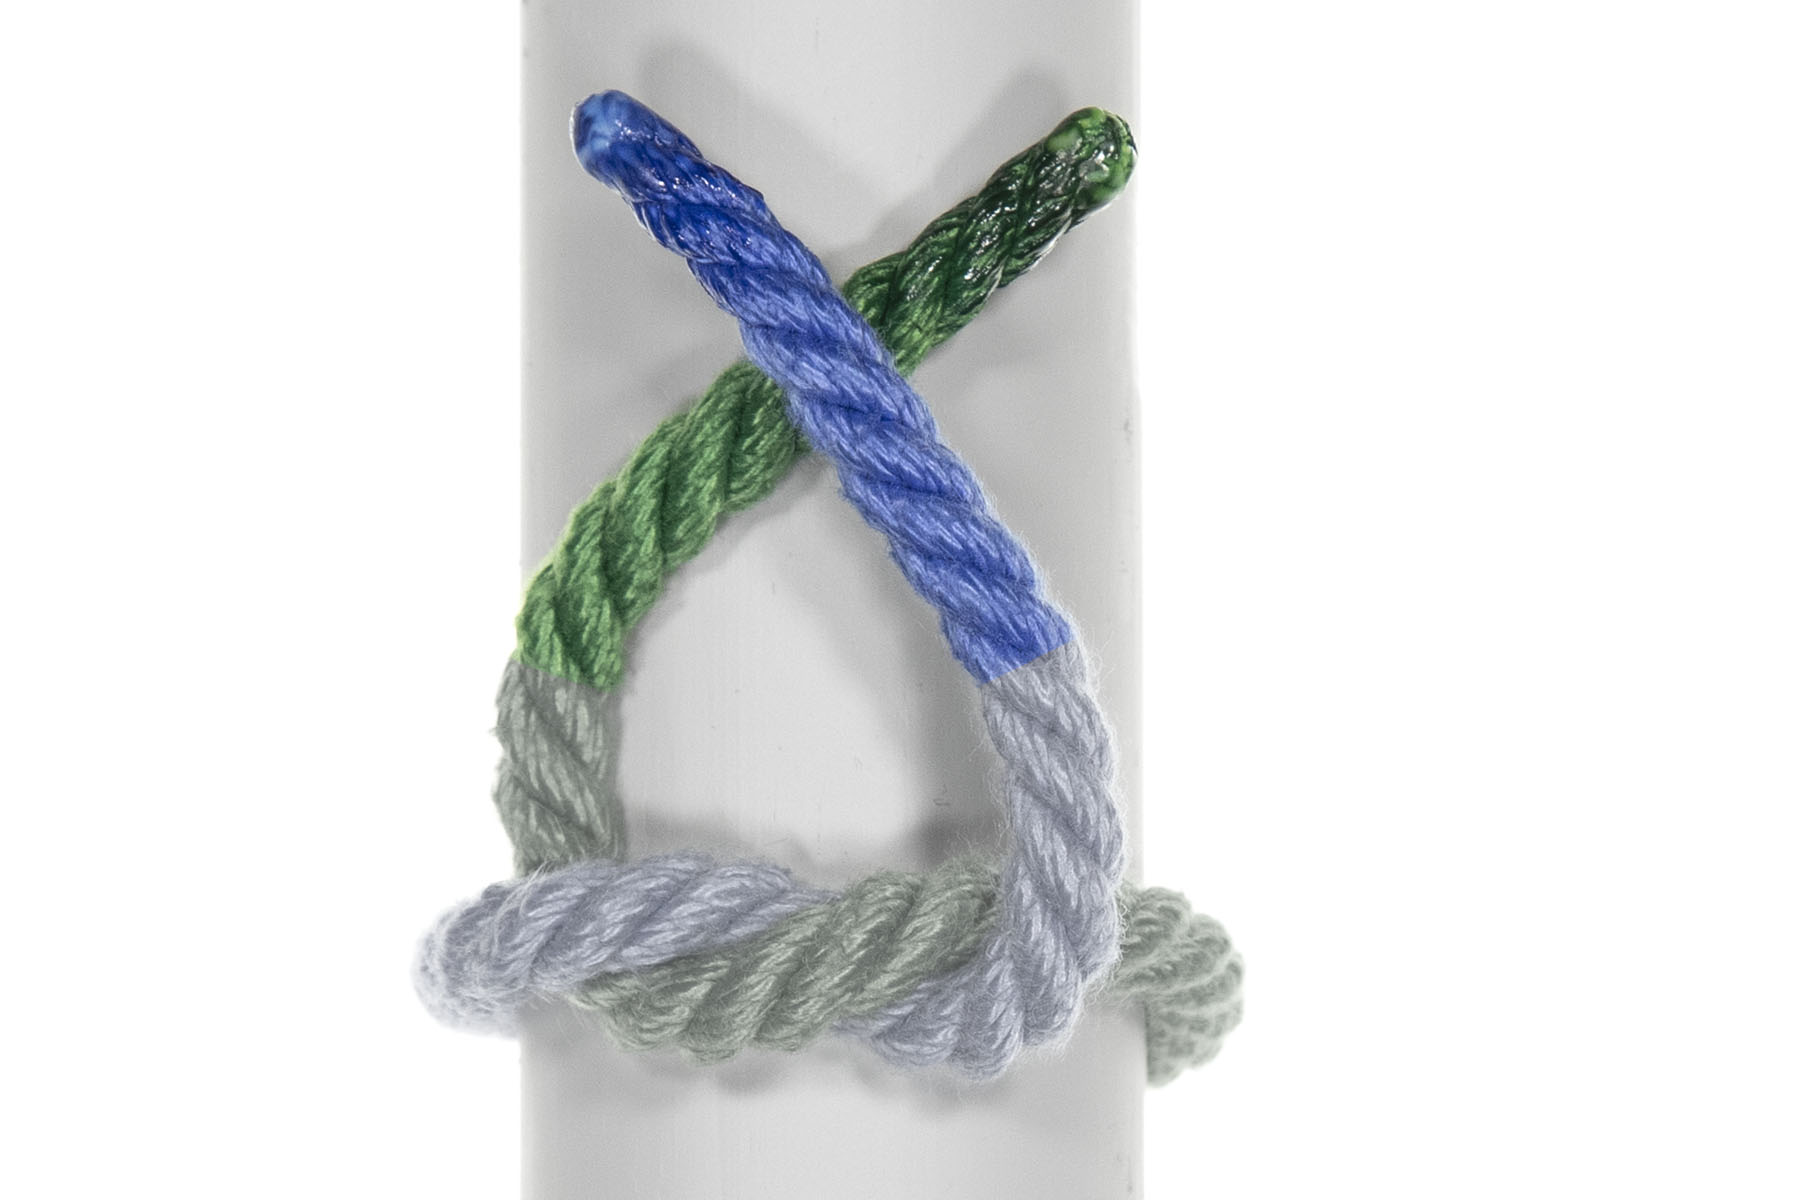 The end of the green rope has been pulled back to the right, almost reaching the right edge of the pole. The blue rope has been similarly bent, and crosses over the green rope about an inch from the ends of both ropes.